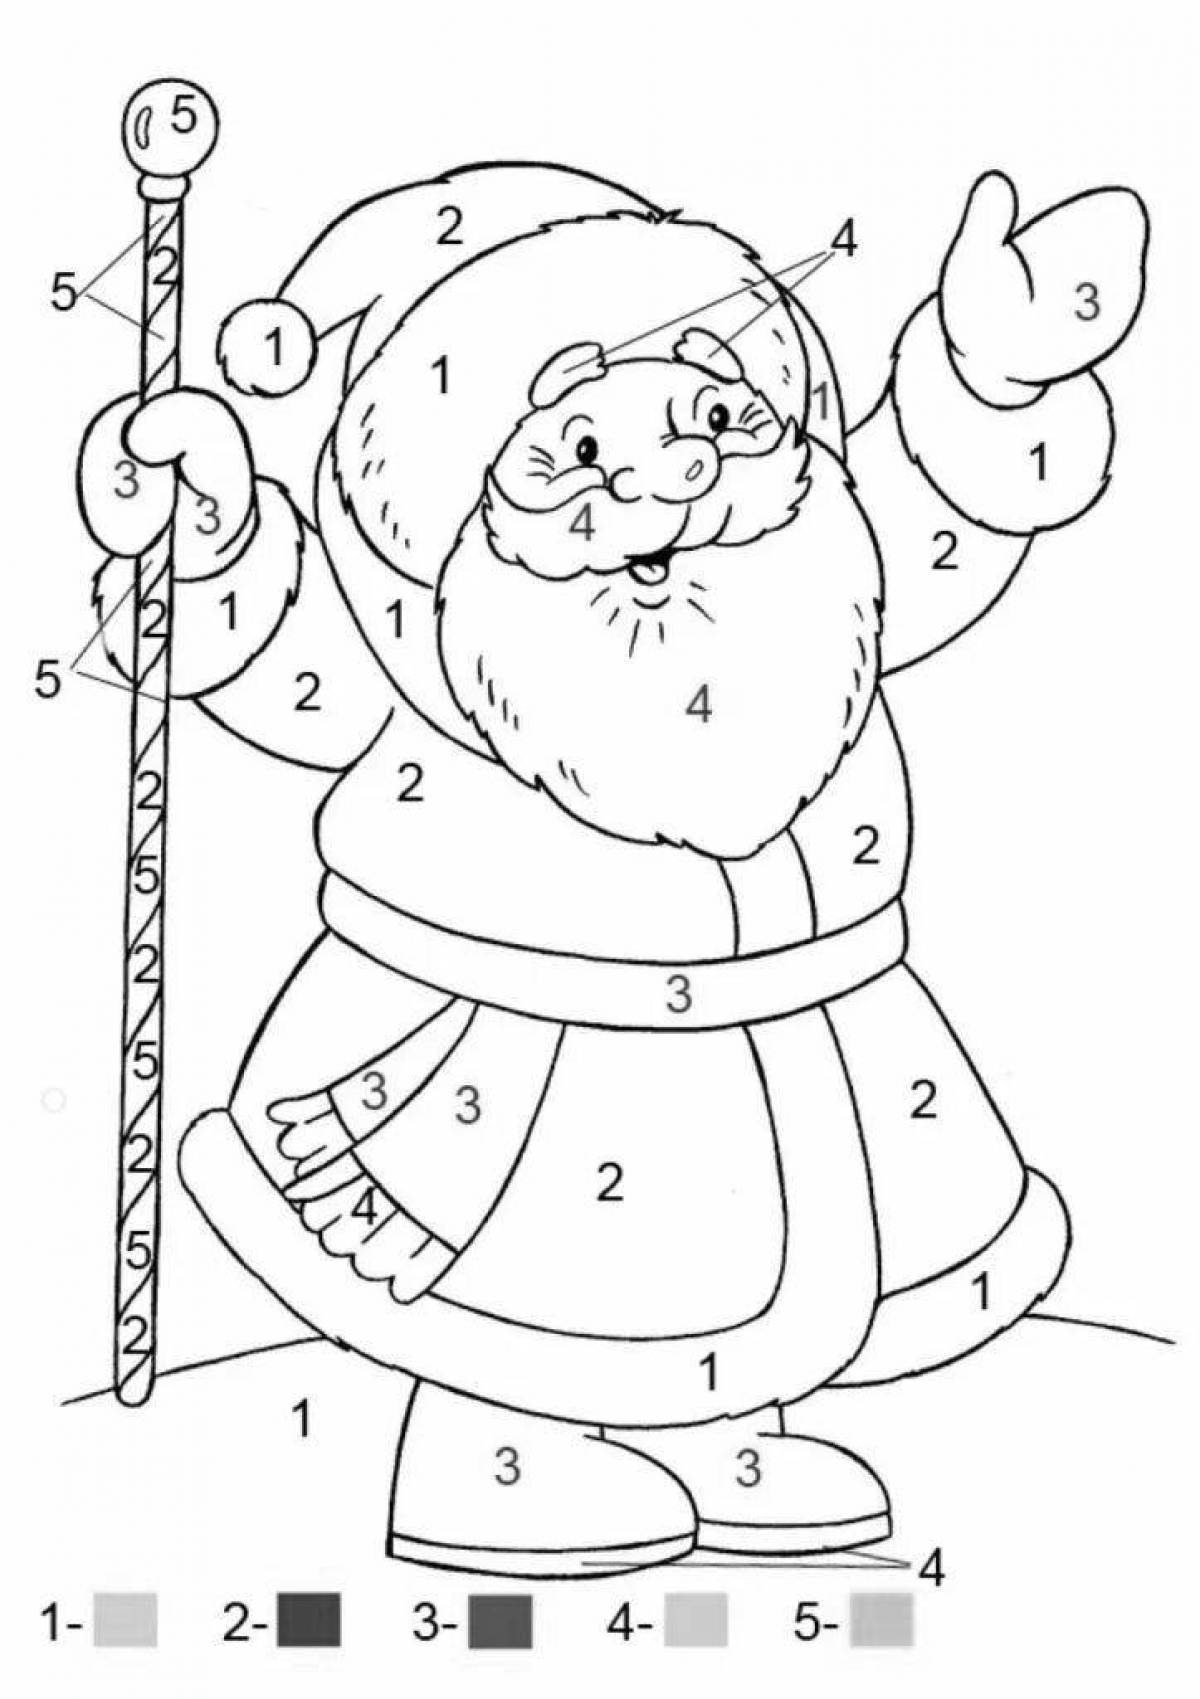 Live coloring snowman by numbers